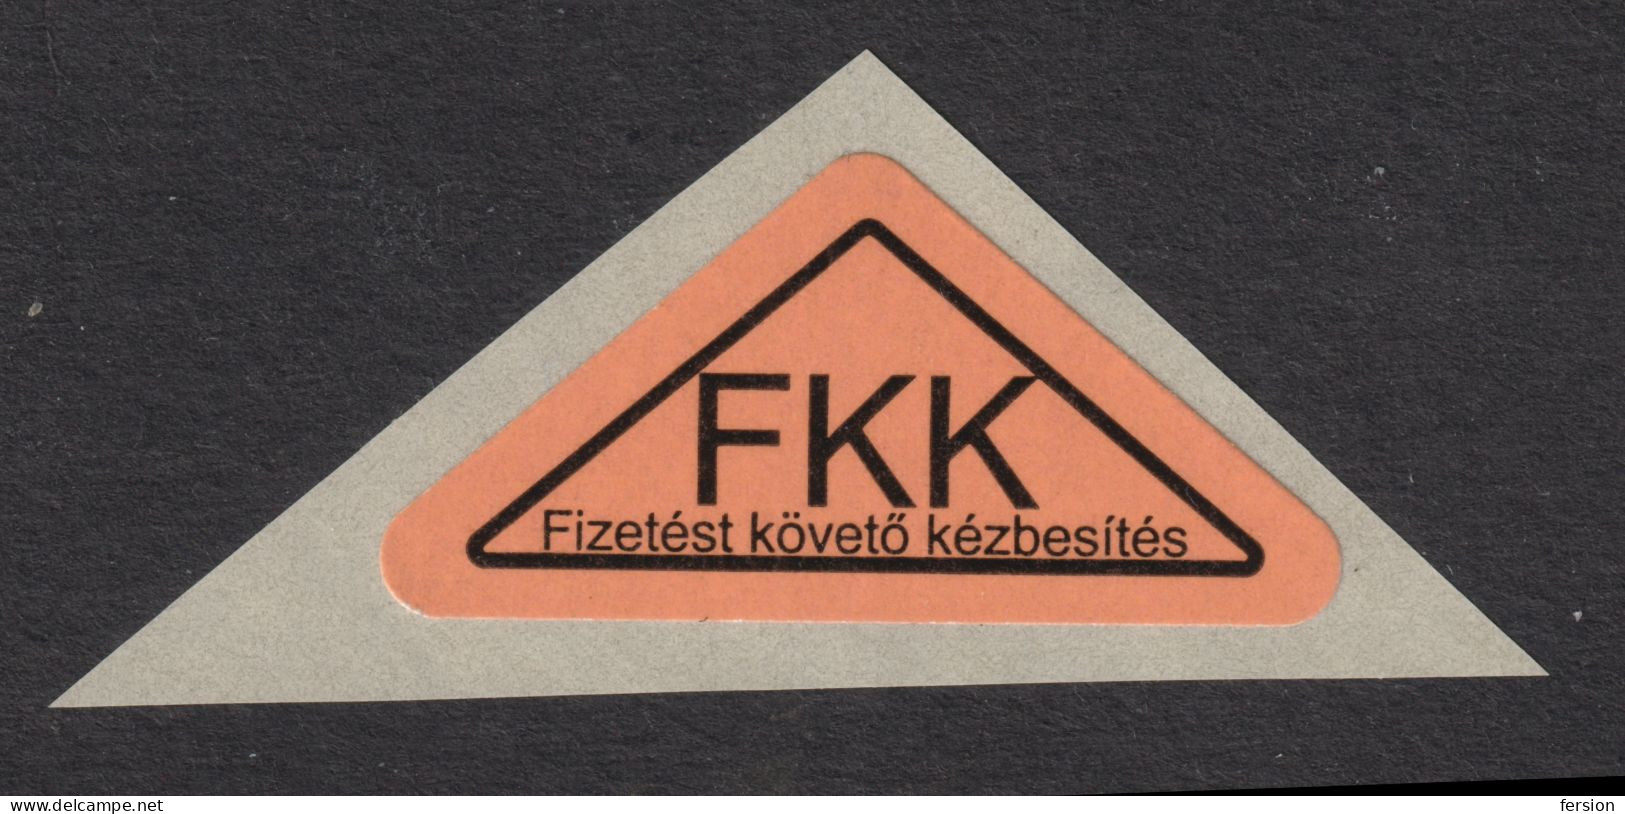 Postal LABEL - Delivery After Payment " Remboursement " FKK - Self Adhesive Vignette Label - 2020 Hungary - MNH - Machine Labels [ATM]